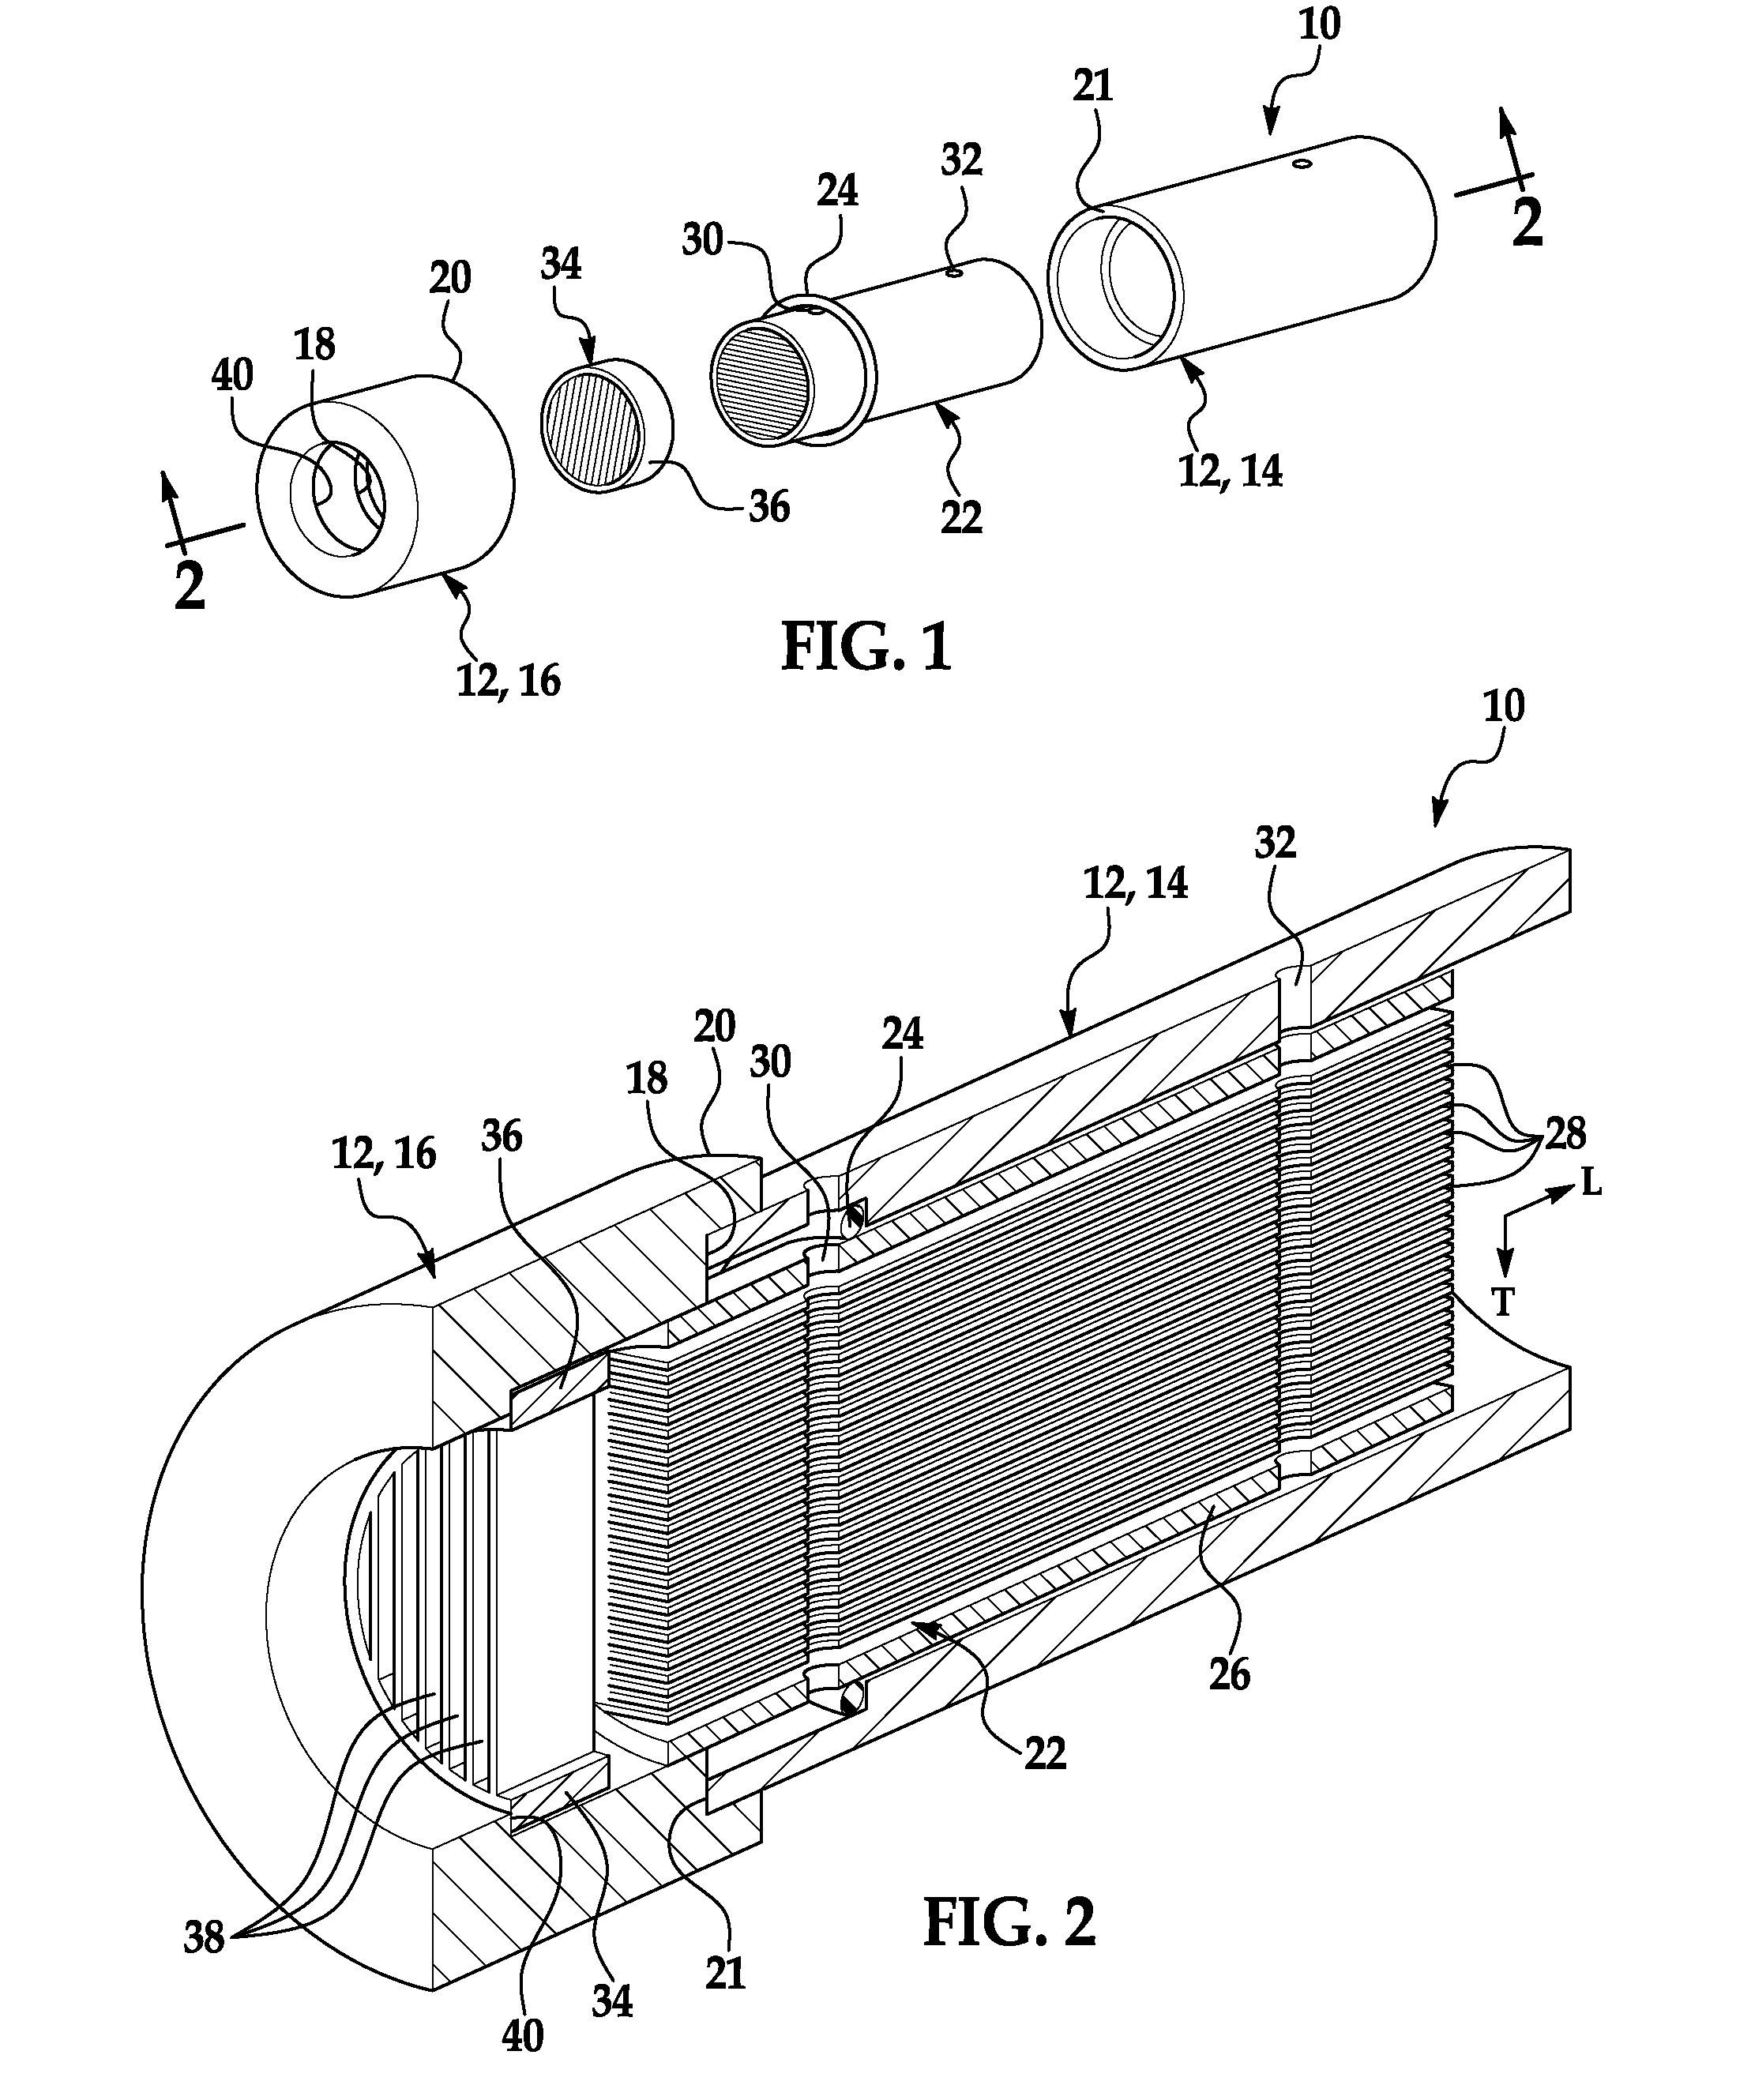 Flow meter for measuring a flow rate of a flow of a fluid